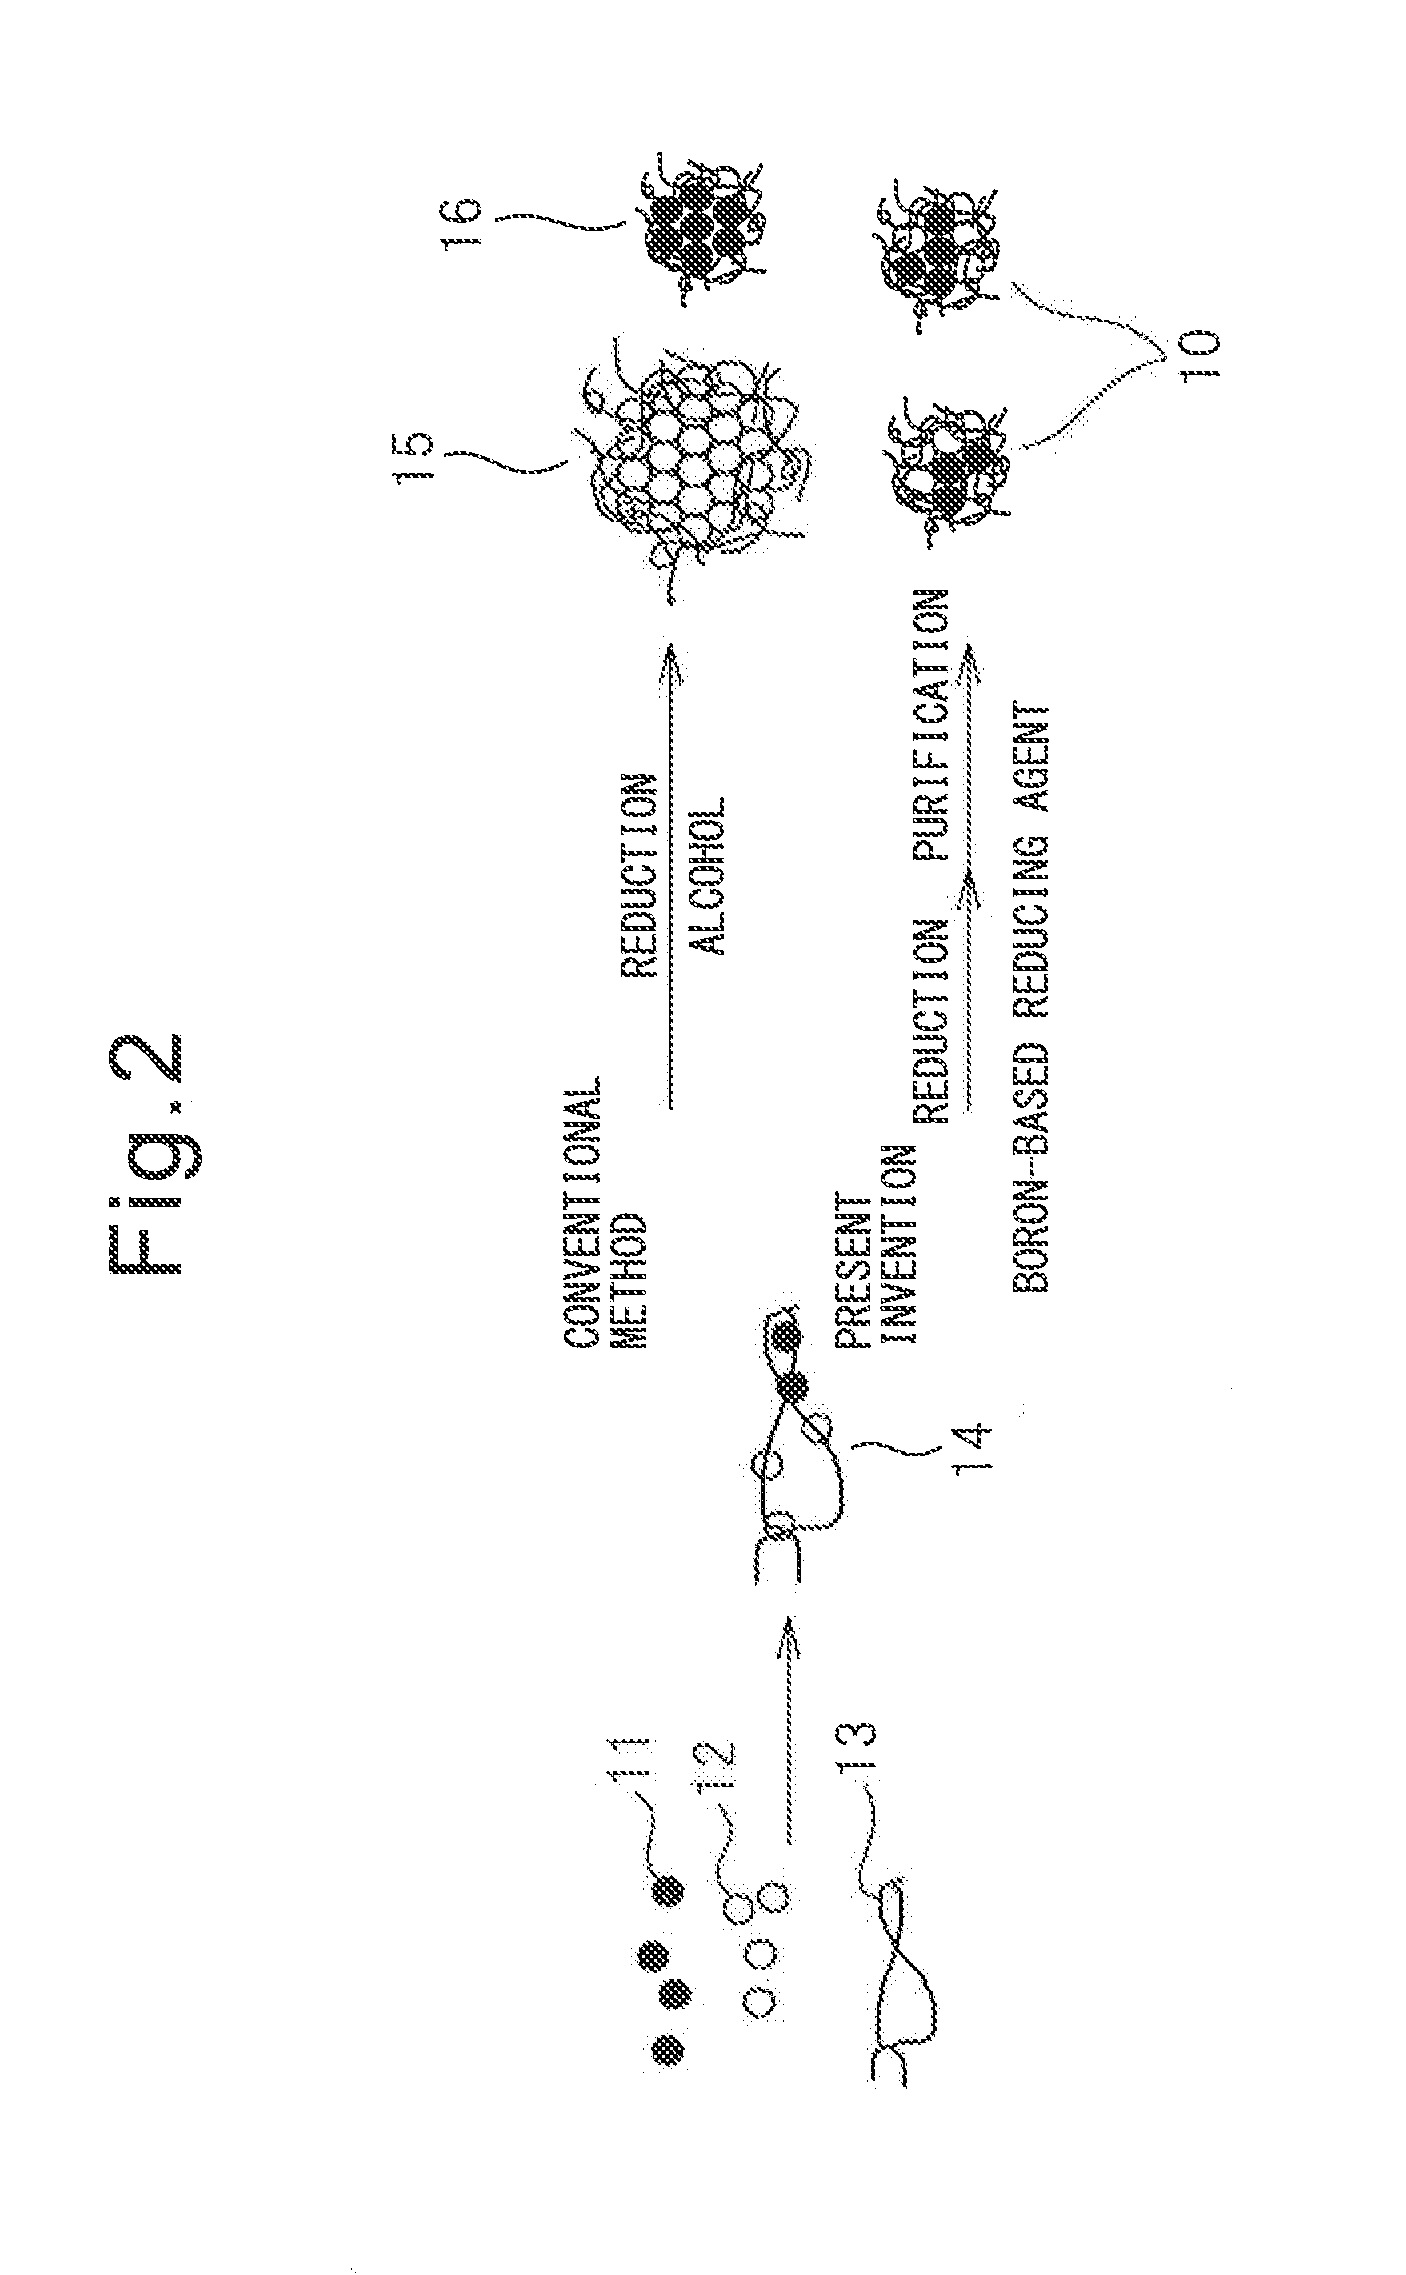 Metal particles, exhaust gas purifying catalyst comprising metal particles, and methods for producing them